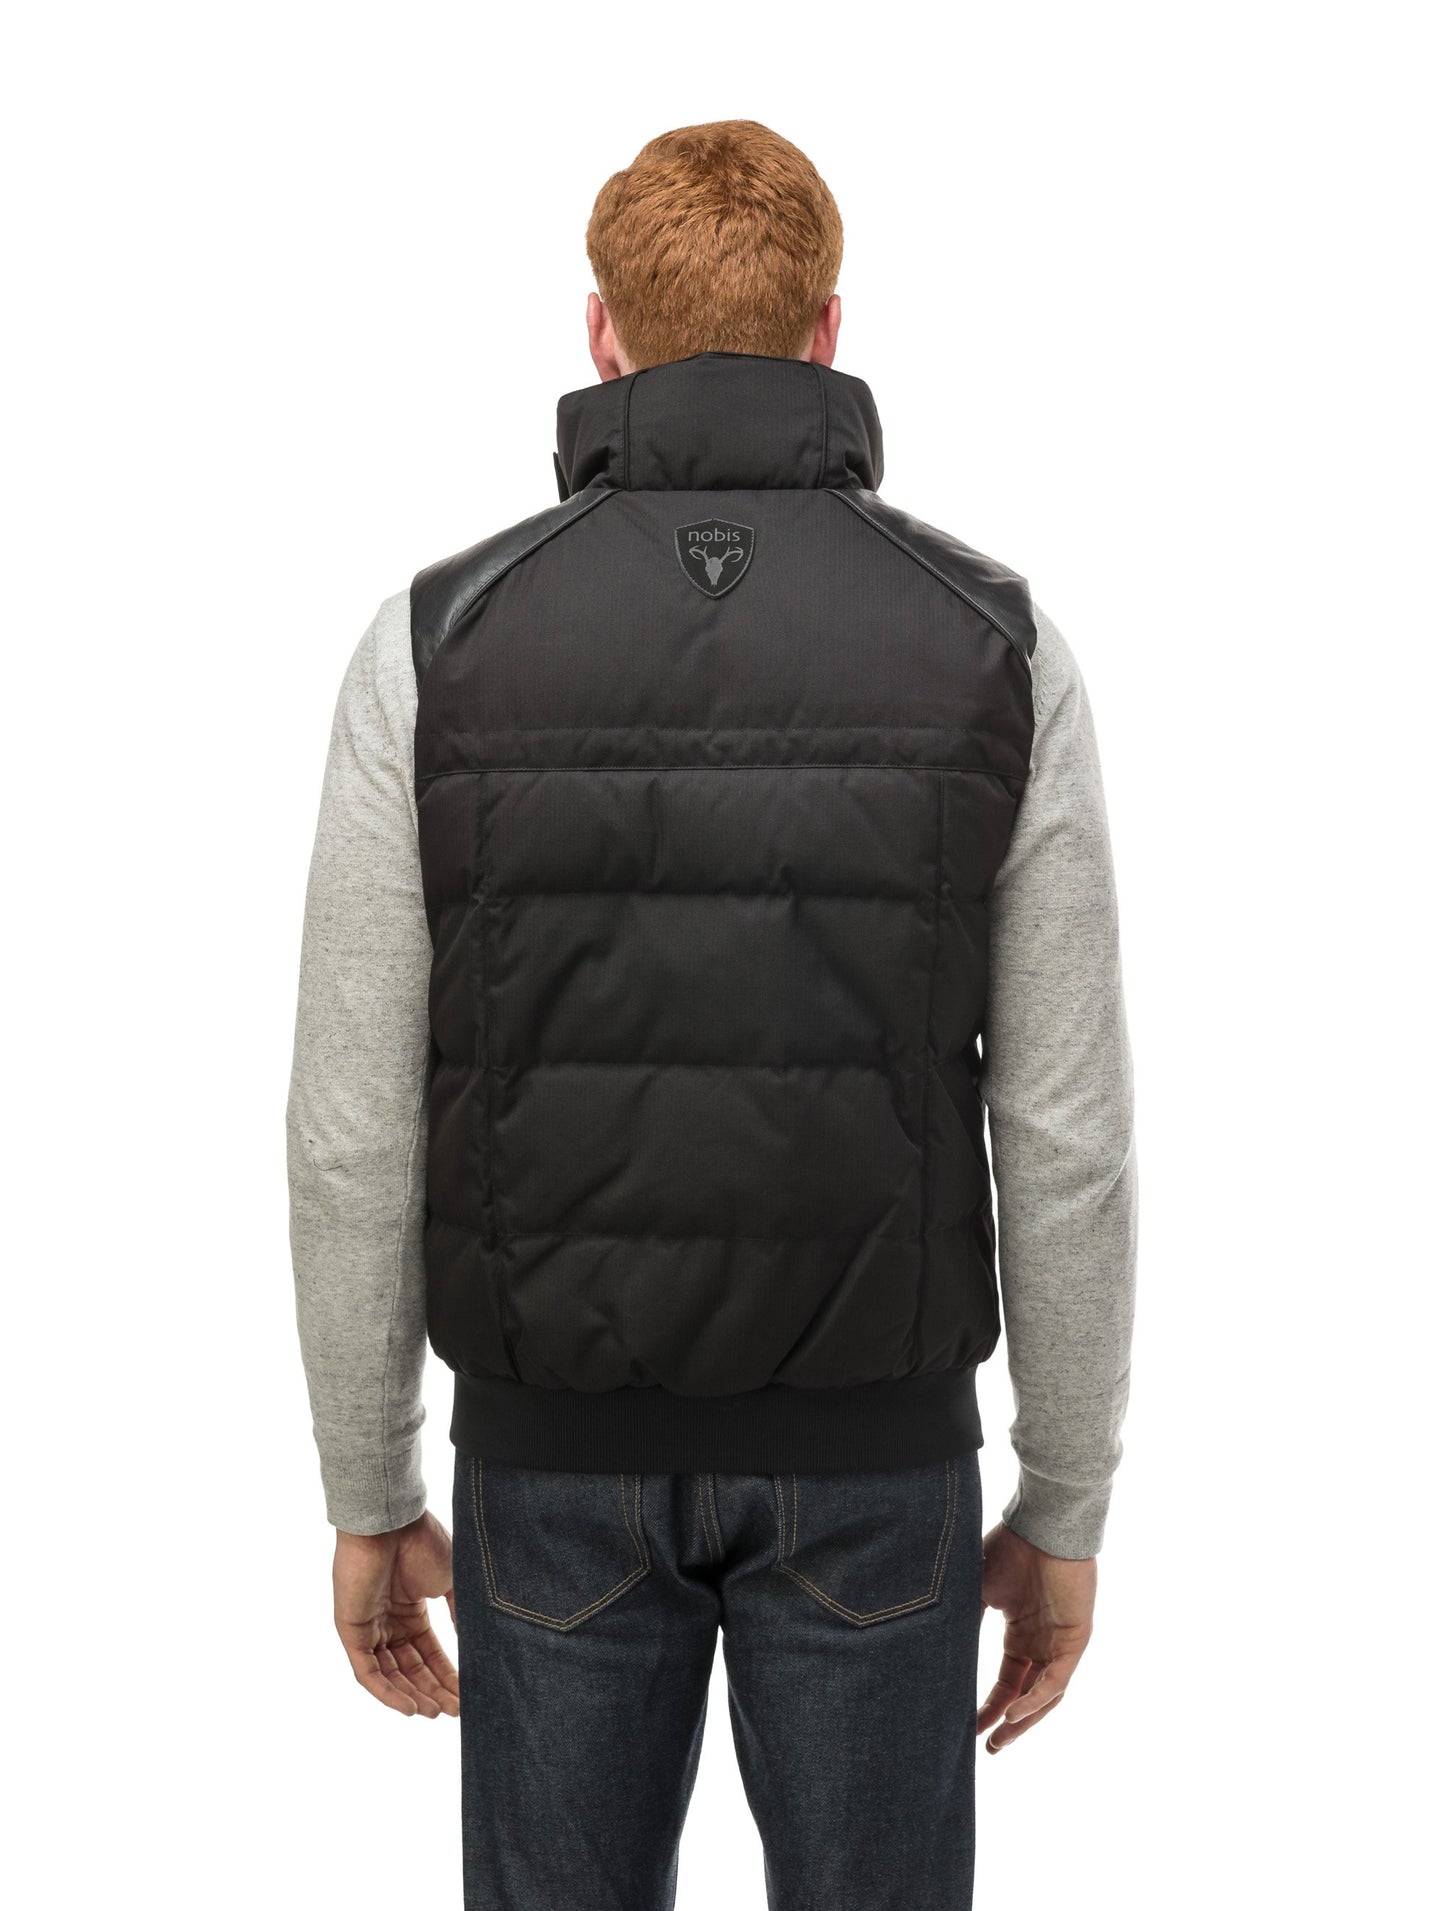 Men's down filled vest with Washable Japanese DWR leather acccent in CH Black